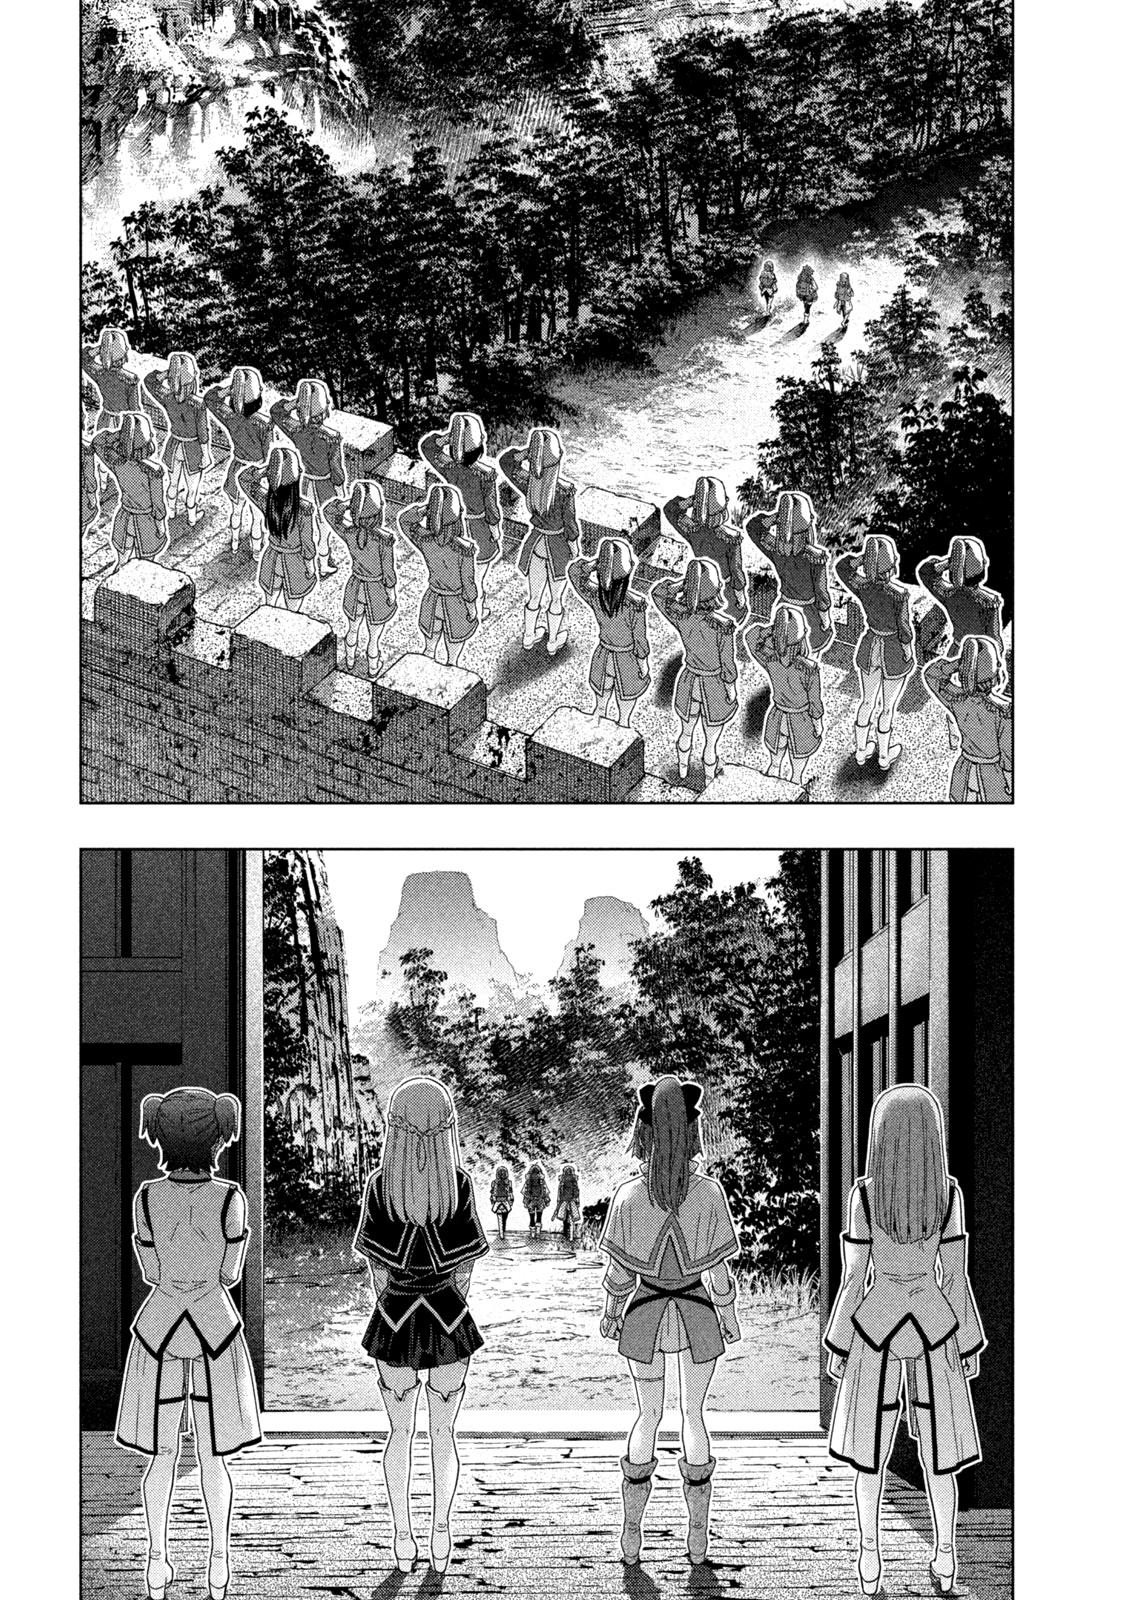 Parallel Paradise Chapter 163: At First Glance, An Isolated . . . House? page 13 - Mangakakalots.com